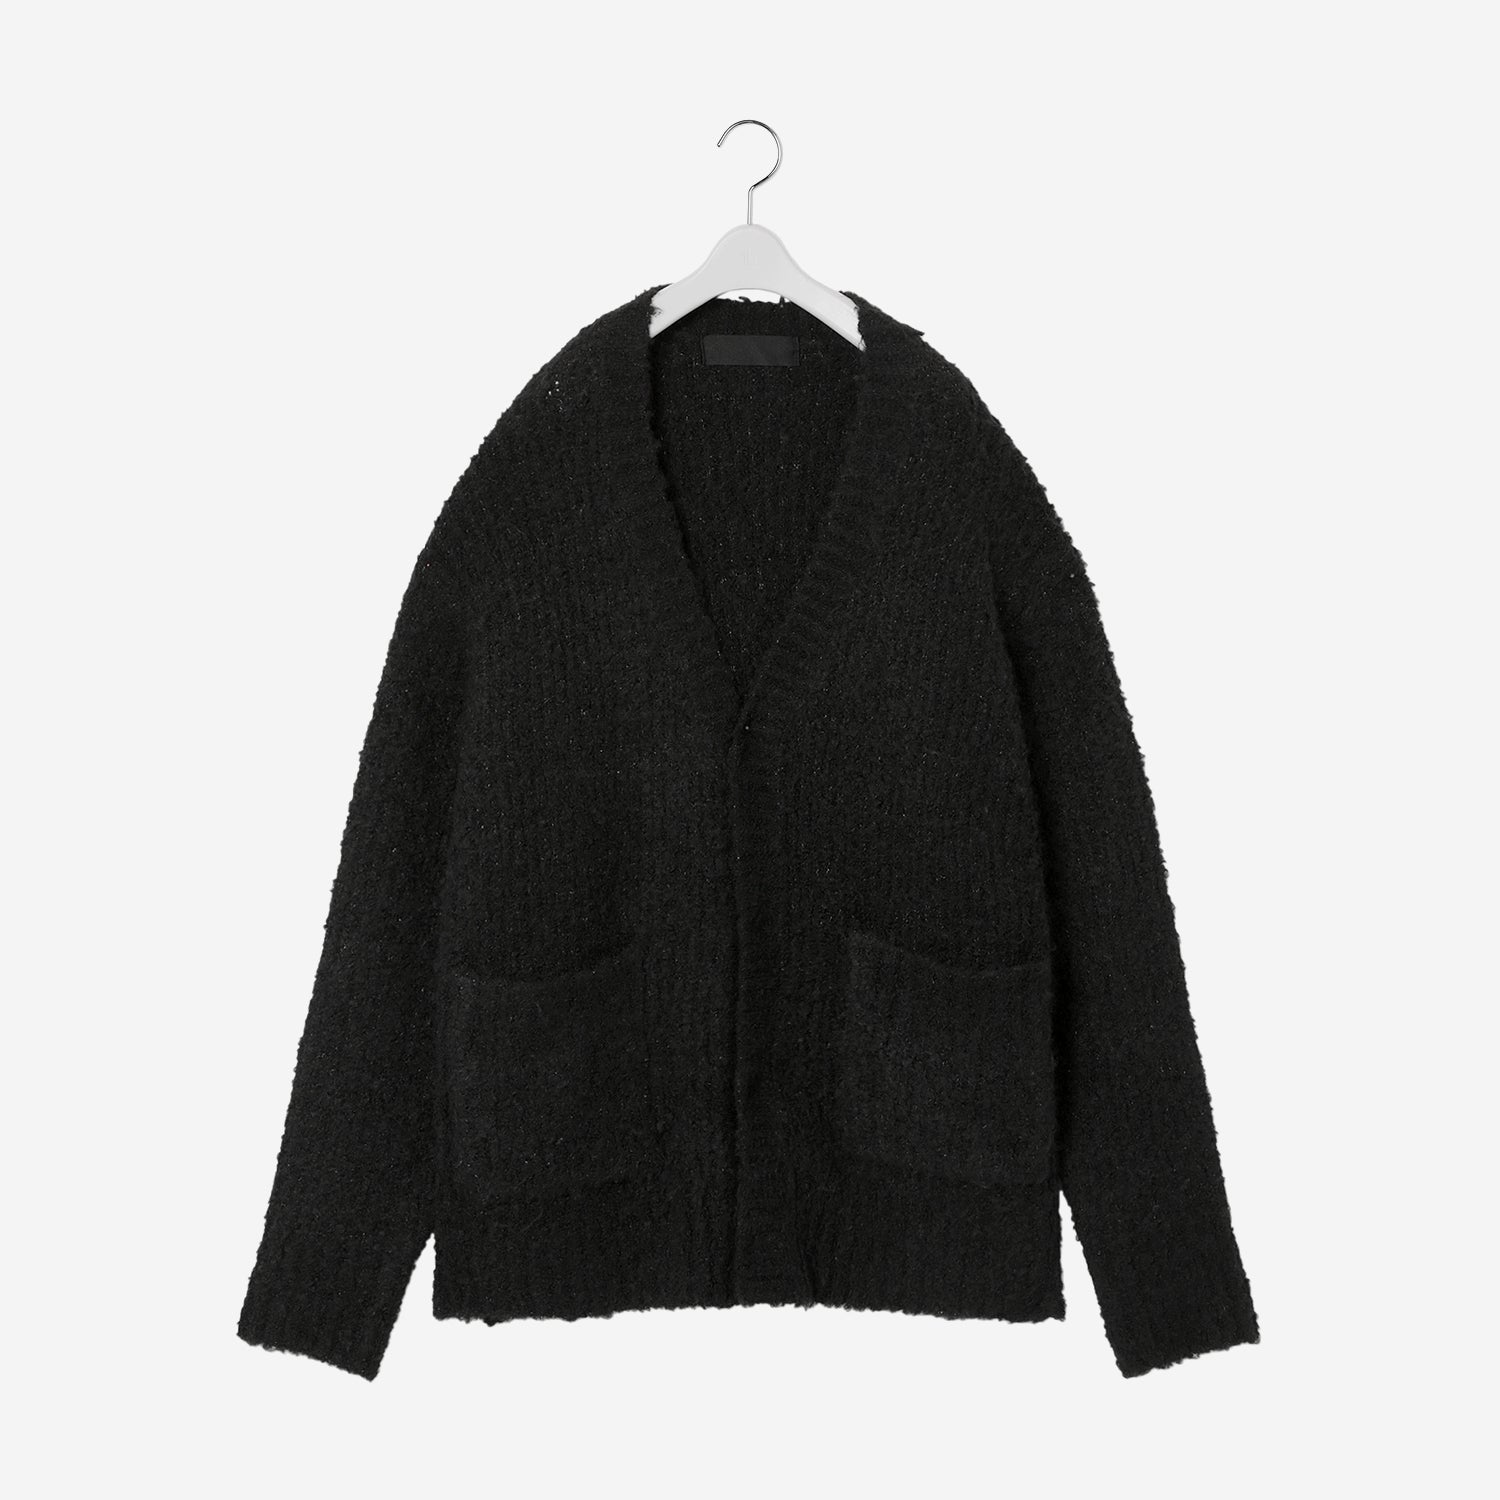 Inflated Cardigan / black